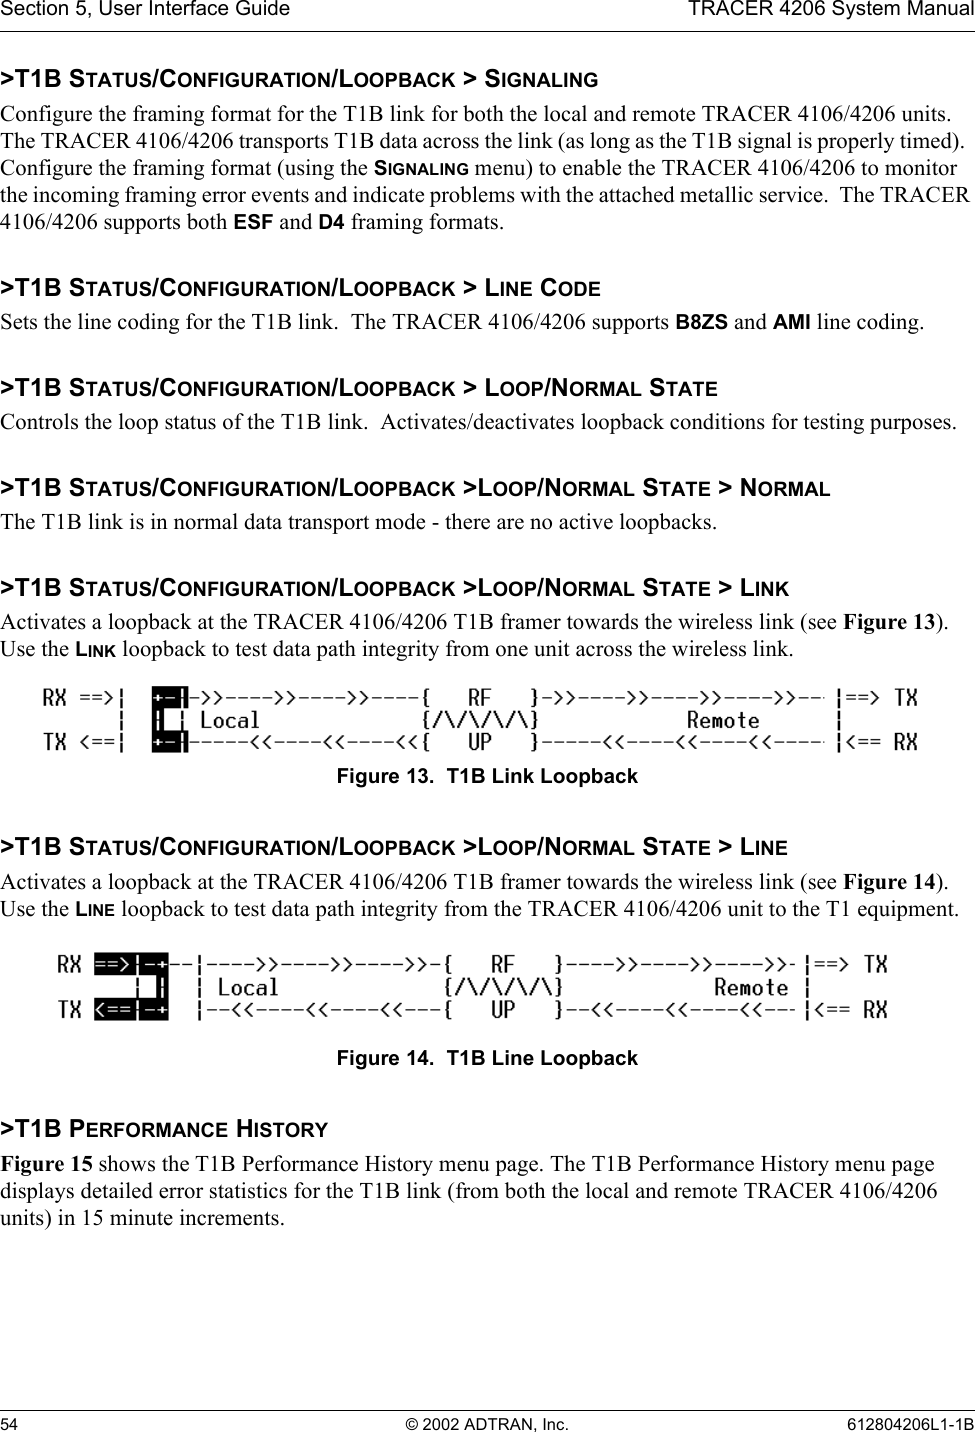 Section 5, User Interface Guide TRACER 4206 System Manual54 © 2002 ADTRAN, Inc. 612804206L1-1B&gt;T1B STATUS/CONFIGURATION/LOOPBACK &gt; SIGNALINGConfigure the framing format for the T1B link for both the local and remote TRACER 4106/4206 units.  The TRACER 4106/4206 transports T1B data across the link (as long as the T1B signal is properly timed).  Configure the framing format (using the SIGNALING menu) to enable the TRACER 4106/4206 to monitor the incoming framing error events and indicate problems with the attached metallic service.  The TRACER 4106/4206 supports both ESF and D4 framing formats.&gt;T1B STATUS/CONFIGURATION/LOOPBACK &gt; LINE CODESets the line coding for the T1B link.  The TRACER 4106/4206 supports B8ZS and AMI line coding.&gt;T1B STATUS/CONFIGURATION/LOOPBACK &gt; LOOP/NORMAL STATEControls the loop status of the T1B link.  Activates/deactivates loopback conditions for testing purposes.&gt;T1B STATUS/CONFIGURATION/LOOPBACK &gt;LOOP/NORMAL STATE &gt; NORMALThe T1B link is in normal data transport mode - there are no active loopbacks.&gt;T1B STATUS/CONFIGURATION/LOOPBACK &gt;LOOP/NORMAL STATE &gt; LINKActivates a loopback at the TRACER 4106/4206 T1B framer towards the wireless link (see Figure 13). Use the LINK loopback to test data path integrity from one unit across the wireless link.Figure 13.  T1B Link Loopback&gt;T1B STATUS/CONFIGURATION/LOOPBACK &gt;LOOP/NORMAL STATE &gt; LINEActivates a loopback at the TRACER 4106/4206 T1B framer towards the wireless link (see Figure 14). Use the LINE loopback to test data path integrity from the TRACER 4106/4206 unit to the T1 equipment.Figure 14.  T1B Line Loopback&gt;T1B PERFORMANCE HISTORYFigure 15 shows the T1B Performance History menu page. The T1B Performance History menu page displays detailed error statistics for the T1B link (from both the local and remote TRACER 4106/4206 units) in 15 minute increments.